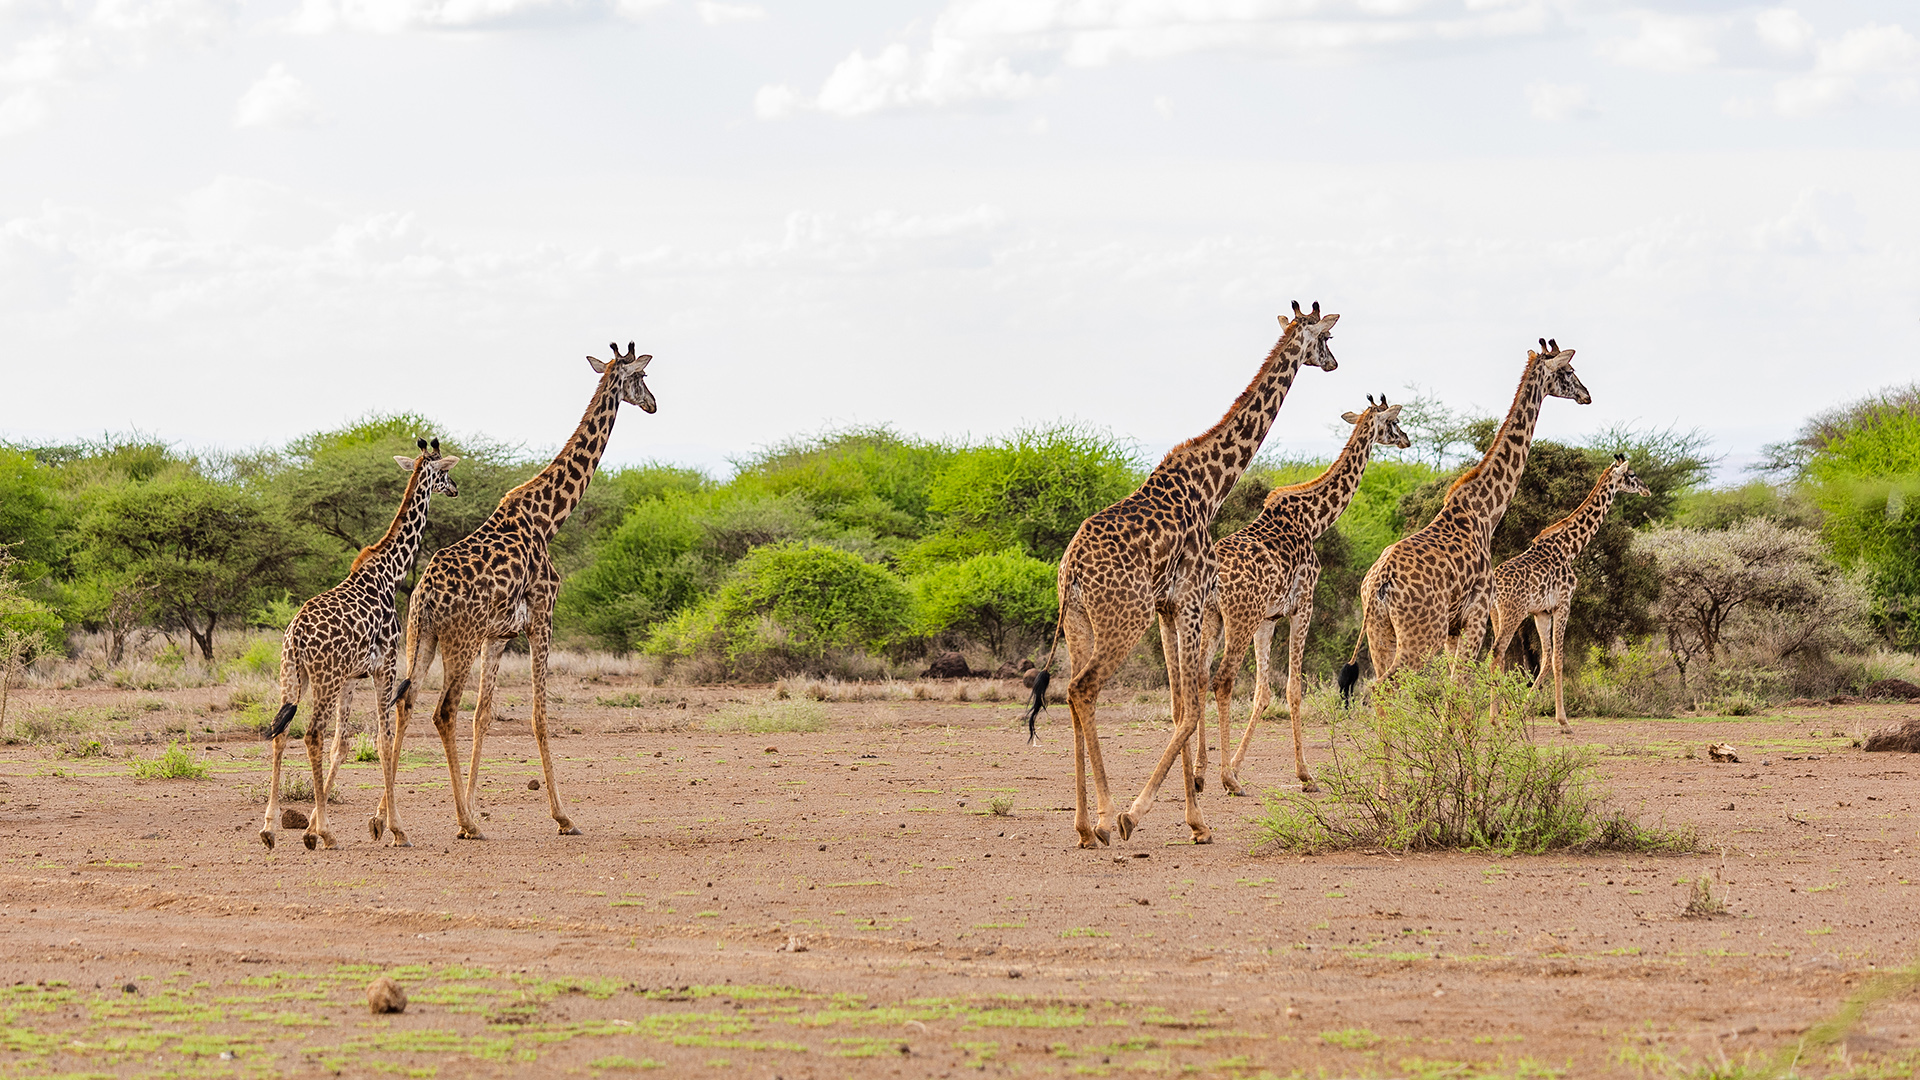 A group of five giraffe in Amboseli, Kenya, walking across dry ground in front of a row of bushes